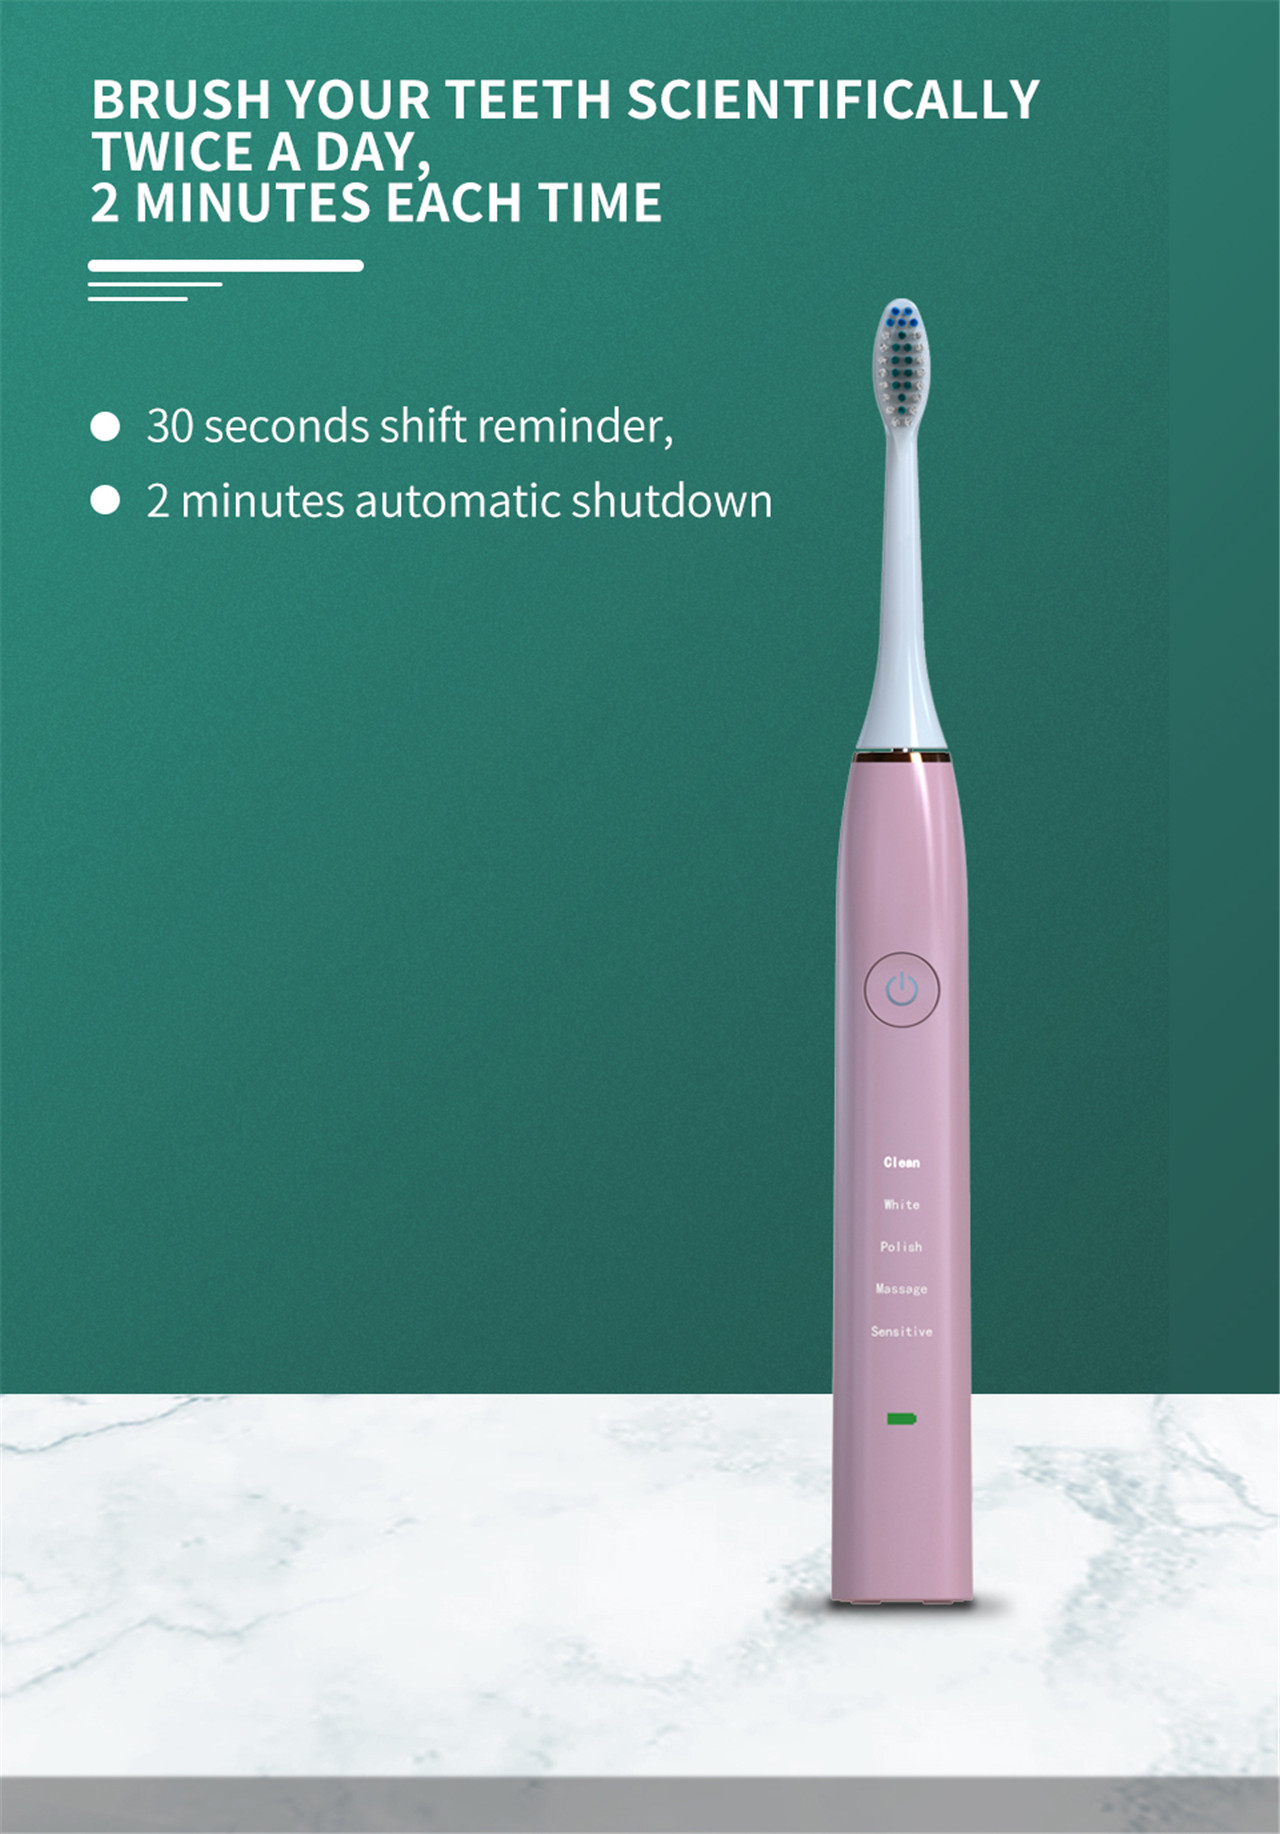 Electronic Toothbrush tooth whiten Sonic care Toothbrush China Manufacturer (4)